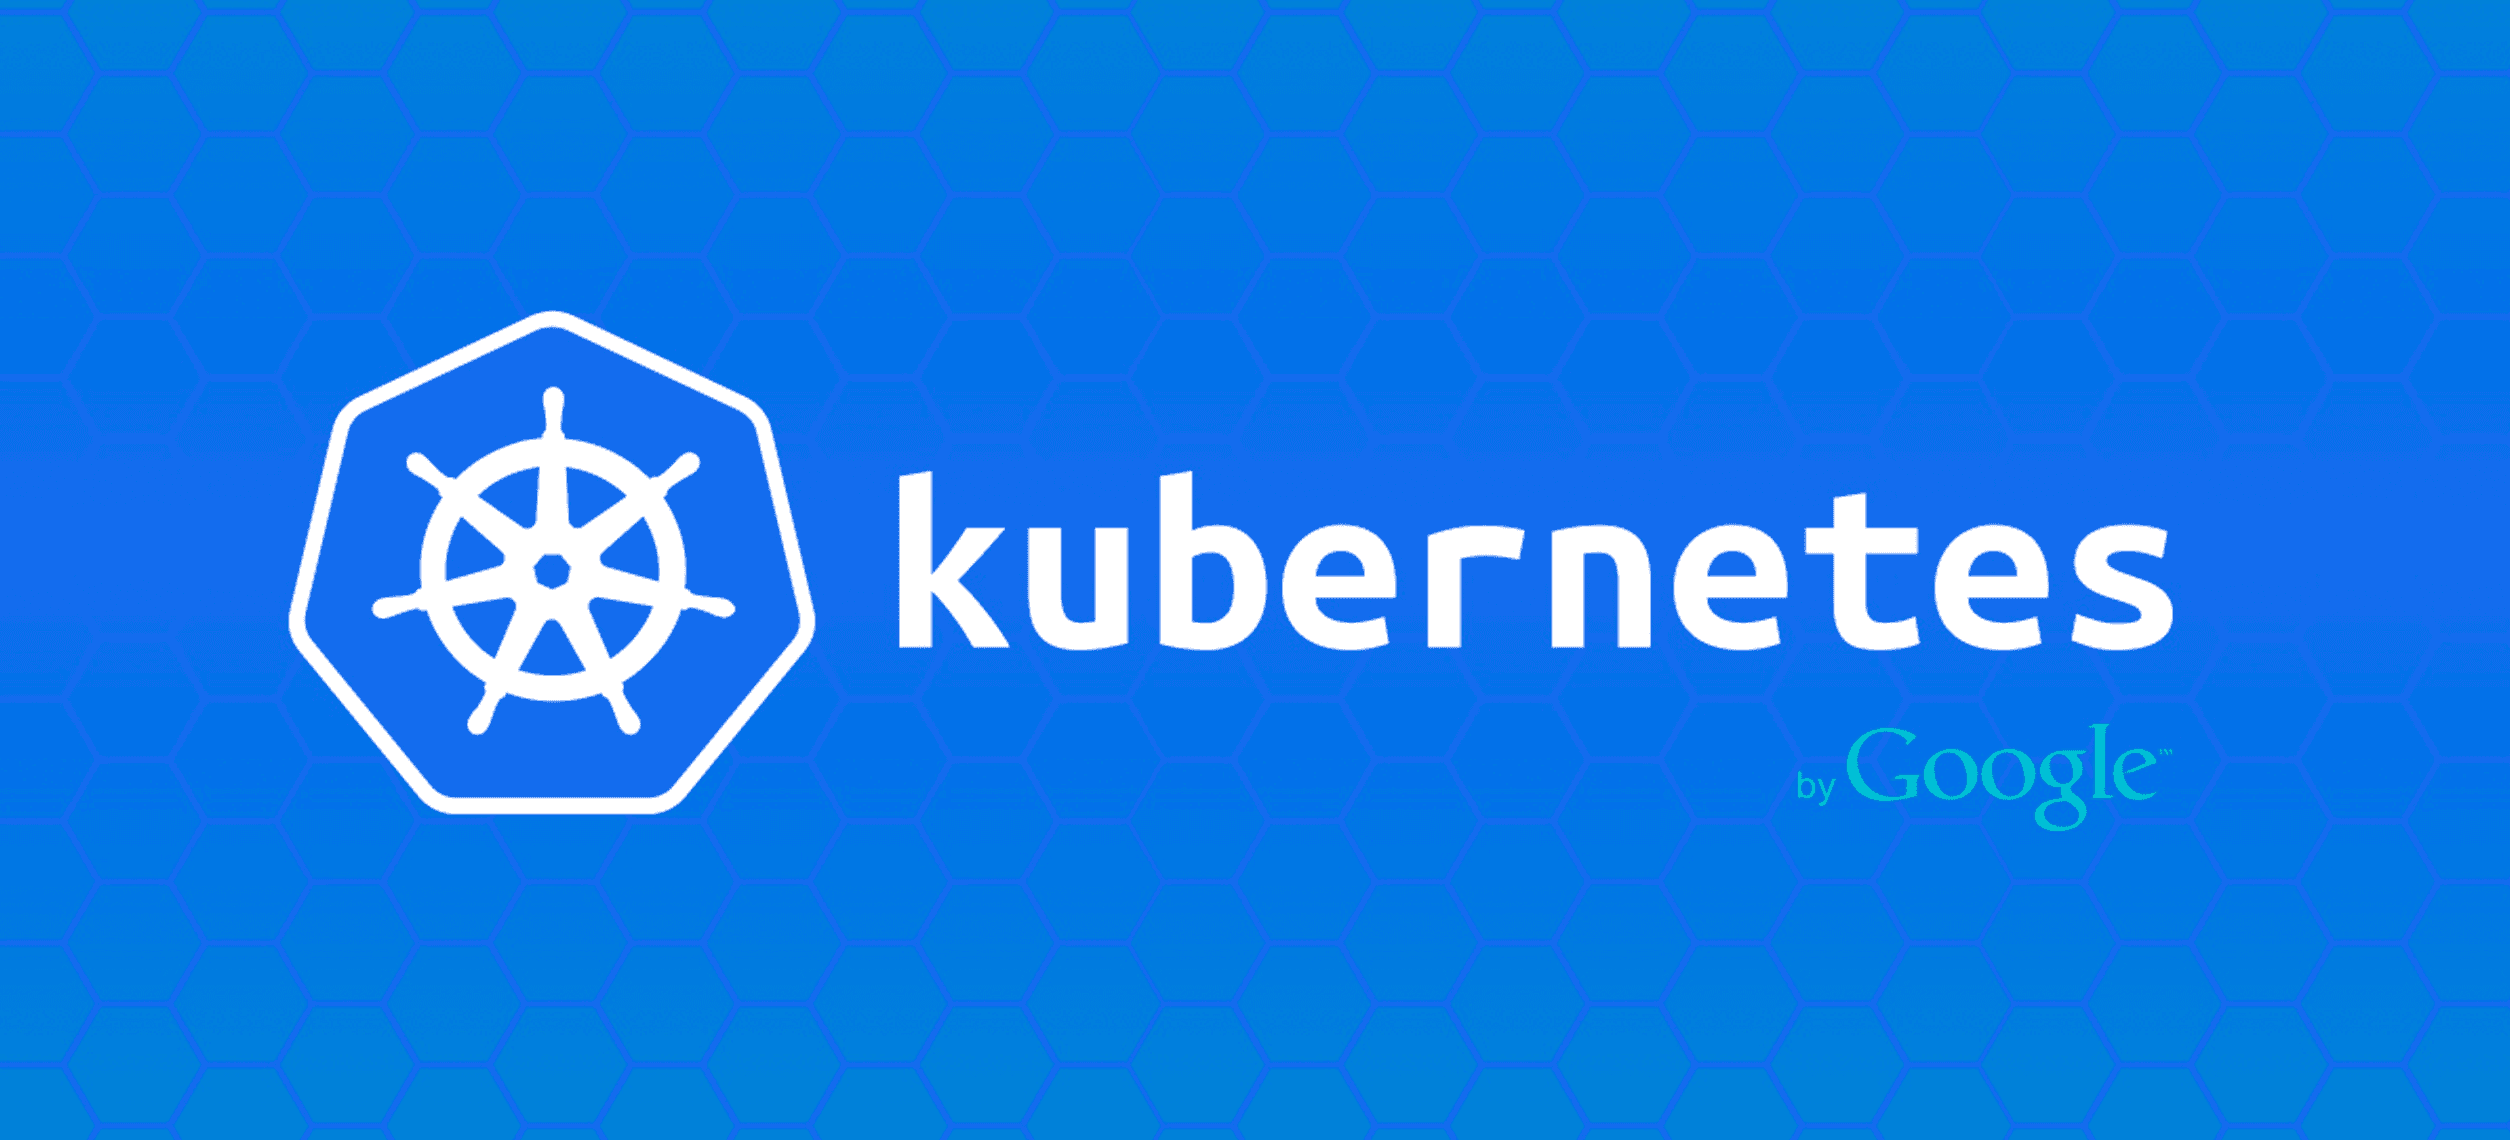 An introduction to Kubernetes.